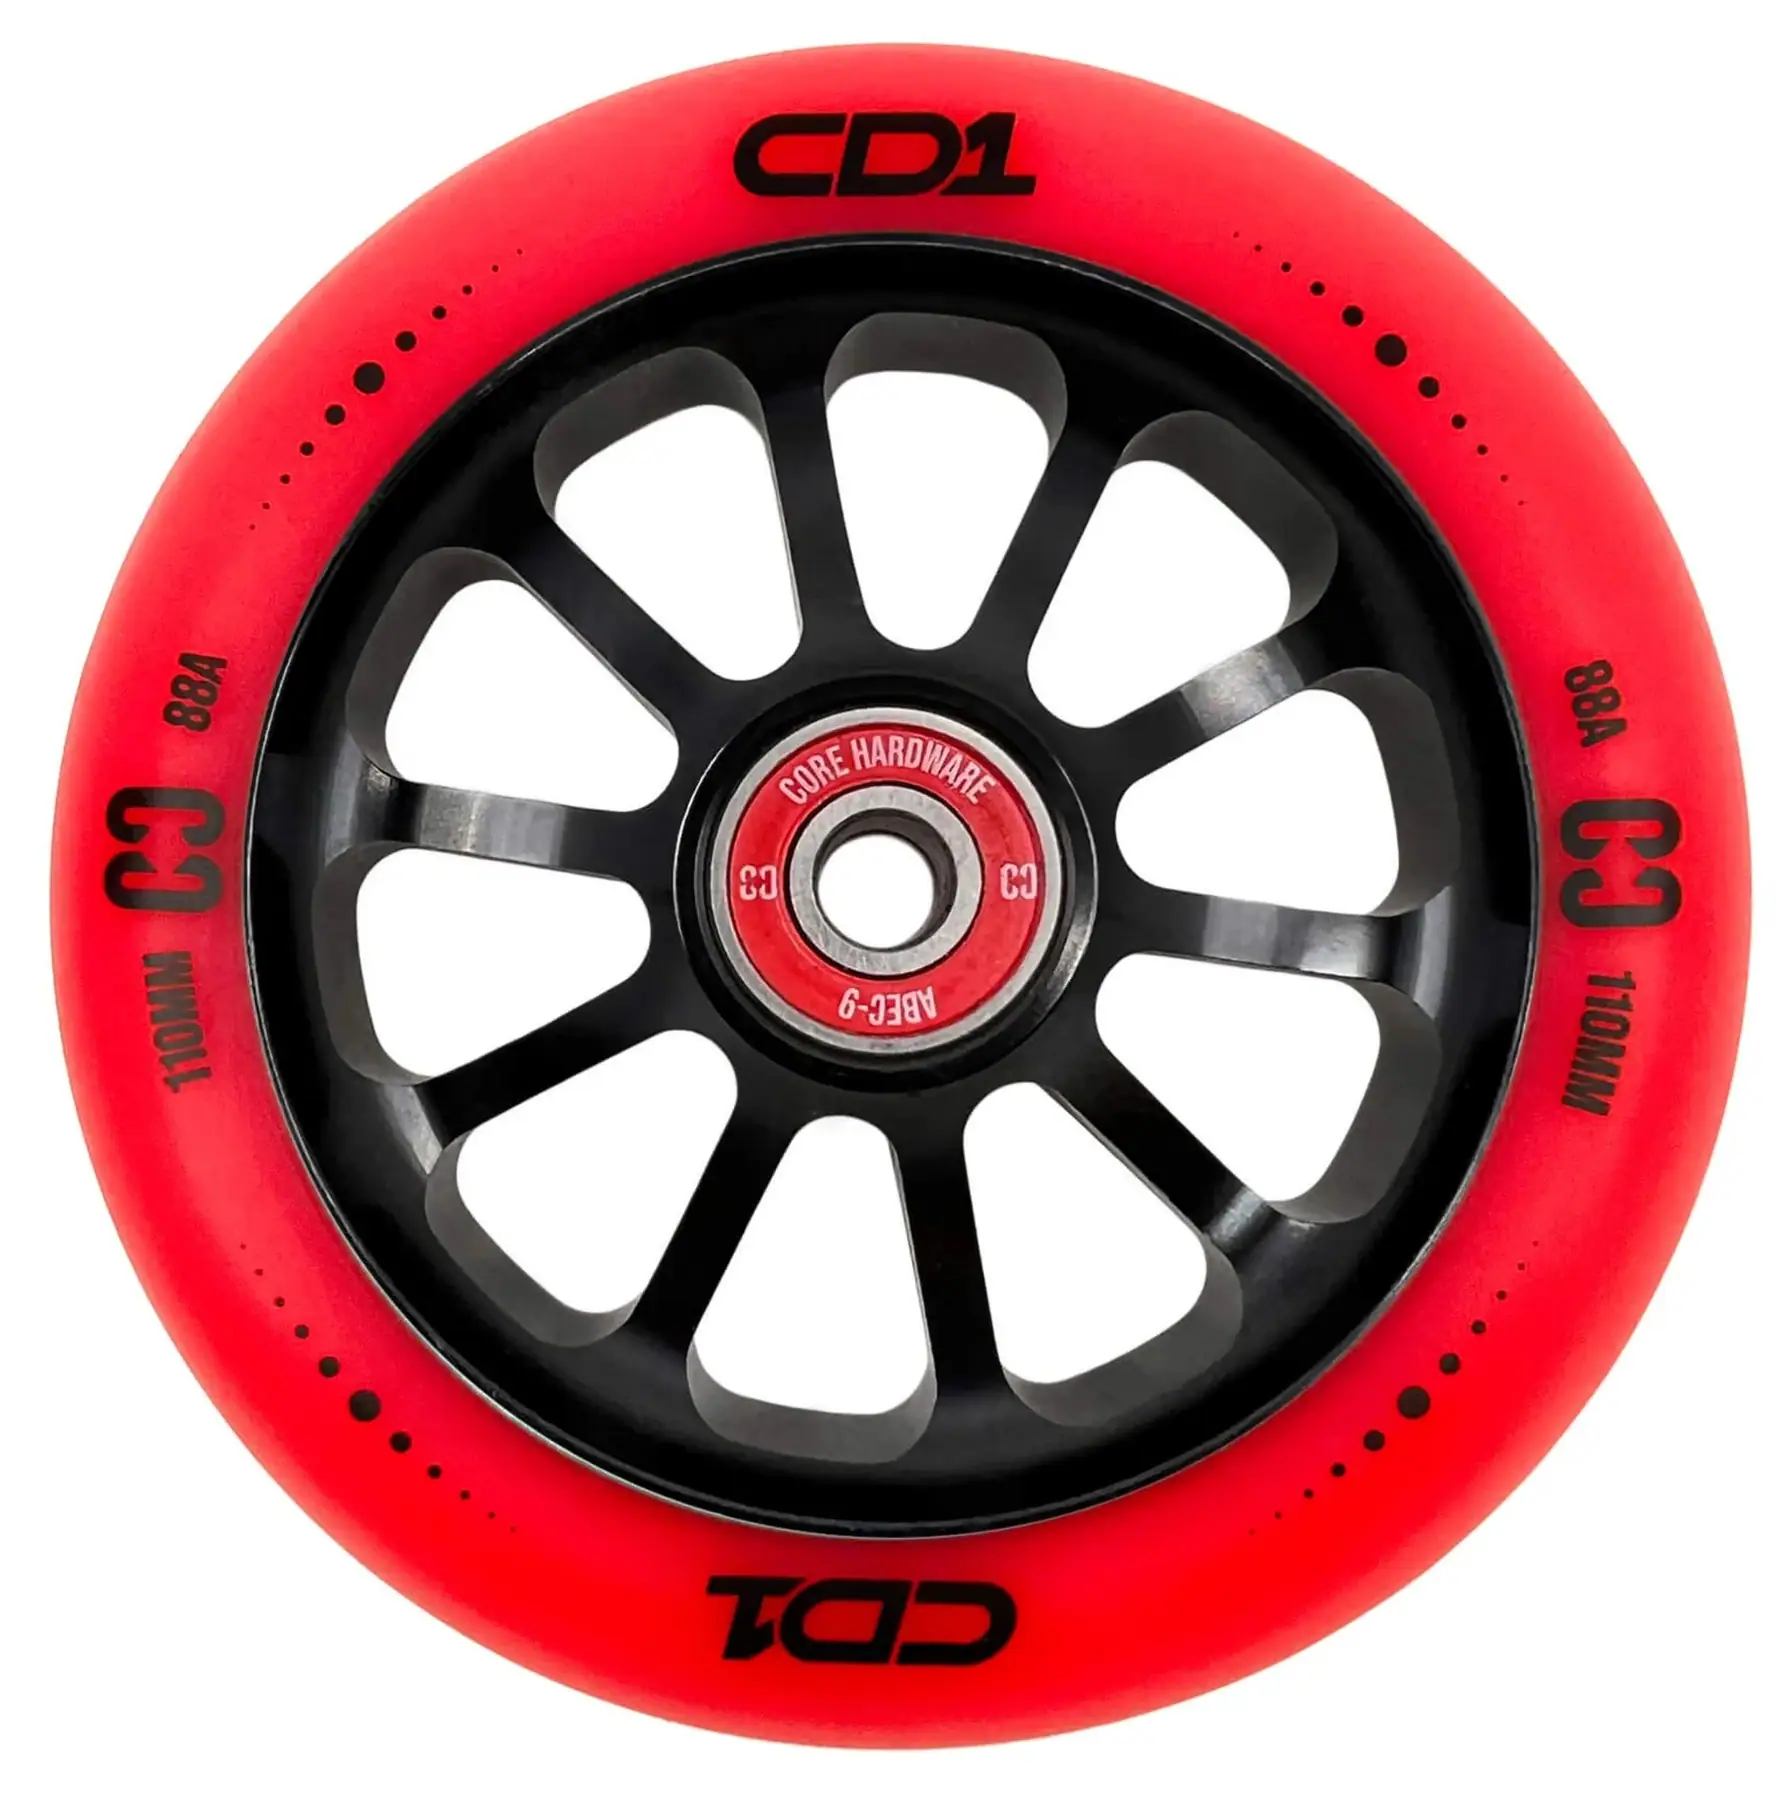 CORE CD1 Pro Scooter  110mm Wheel - Red